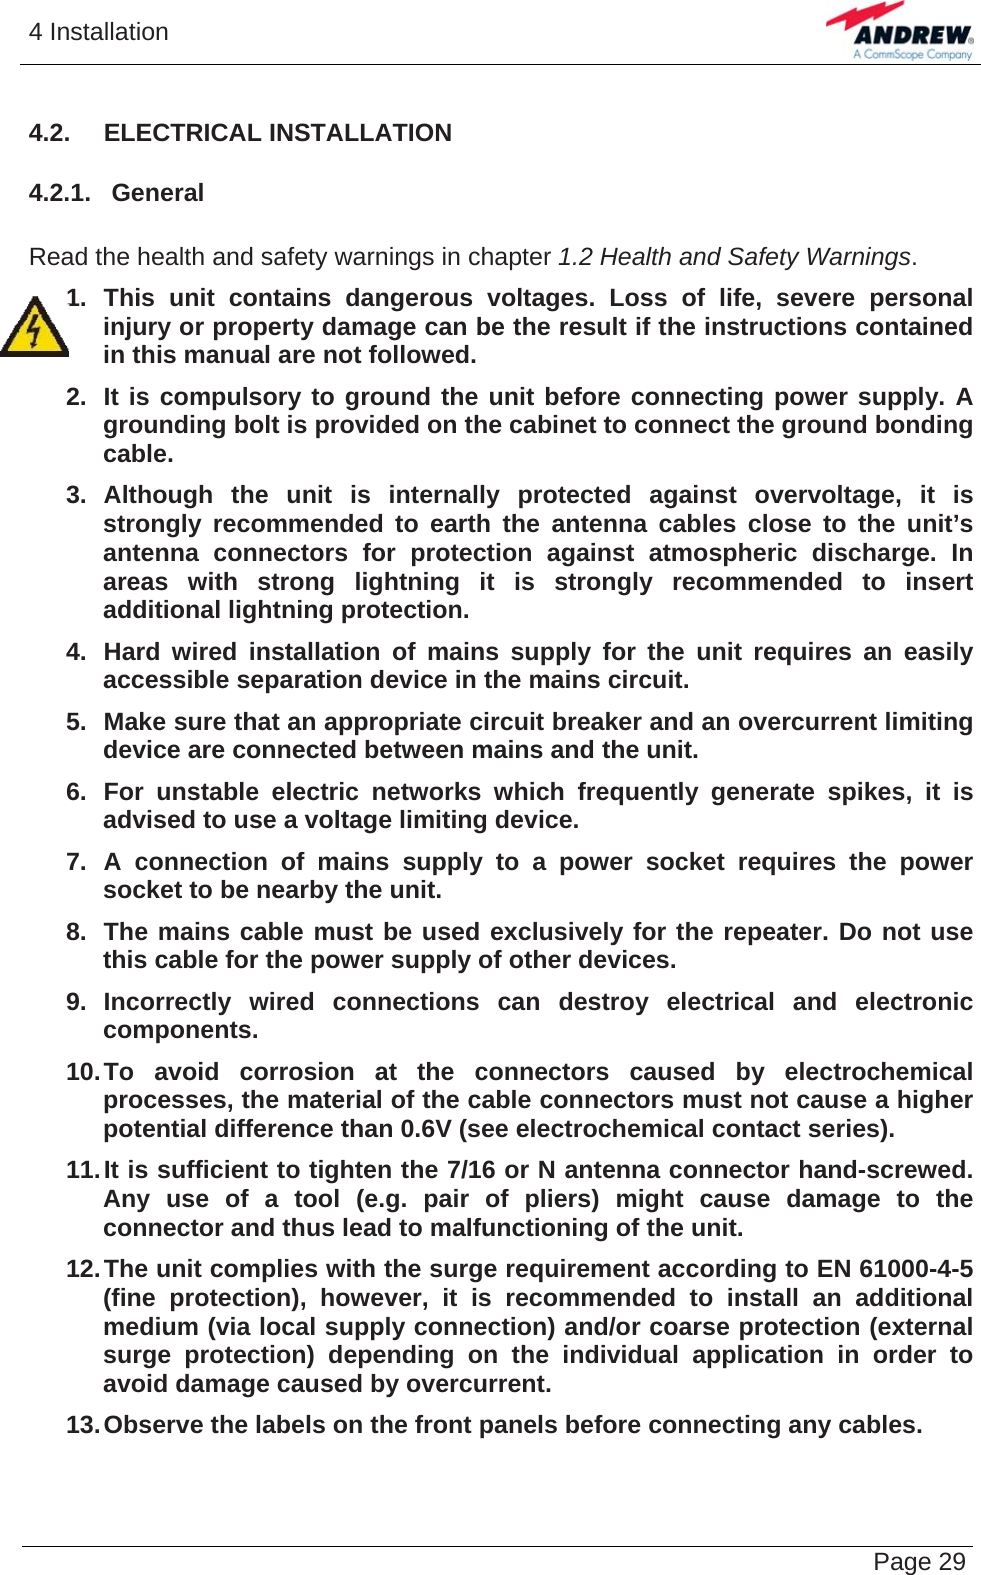 4 Installation   Page 294.2.  ELECTRICAL INSTALLATION 4.2.1.  General  Read the health and safety warnings in chapter 1.2 Health and Safety Warnings. 1. This unit contains dangerous voltages. Loss of life, severe personal injury or property damage can be the result if the instructions contained in this manual are not followed. 2.  It is compulsory to ground the unit before connecting power supply. A grounding bolt is provided on the cabinet to connect the ground bonding cable. 3. Although the unit is internally protected against overvoltage, it is strongly recommended to earth the antenna cables close to the unit’s antenna connectors for protection against atmospheric discharge. In areas with strong lightning it is strongly recommended to insert additional lightning protection. 4.  Hard wired installation of mains supply for the unit requires an easily accessible separation device in the mains circuit. 5.  Make sure that an appropriate circuit breaker and an overcurrent limiting device are connected between mains and the unit. 6.  For unstable electric networks which frequently generate spikes, it is advised to use a voltage limiting device. 7. A connection of mains supply to a power socket requires the power socket to be nearby the unit. 8.  The mains cable must be used exclusively for the repeater. Do not use this cable for the power supply of other devices. 9. Incorrectly wired connections can destroy electrical and electronic components. 10. To avoid corrosion at the connectors caused by electrochemical processes, the material of the cable connectors must not cause a higher potential difference than 0.6V (see electrochemical contact series). 11. It is sufficient to tighten the 7/16 or N antenna connector hand-screwed. Any use of a tool (e.g. pair of pliers) might cause damage to the connector and thus lead to malfunctioning of the unit. 12. The unit complies with the surge requirement according to EN 61000-4-5 (fine protection), however, it is recommended to install an additional  medium (via local supply connection) and/or coarse protection (external surge protection) depending on the individual application in order to avoid damage caused by overcurrent. 13. Observe the labels on the front panels before connecting any cables.   